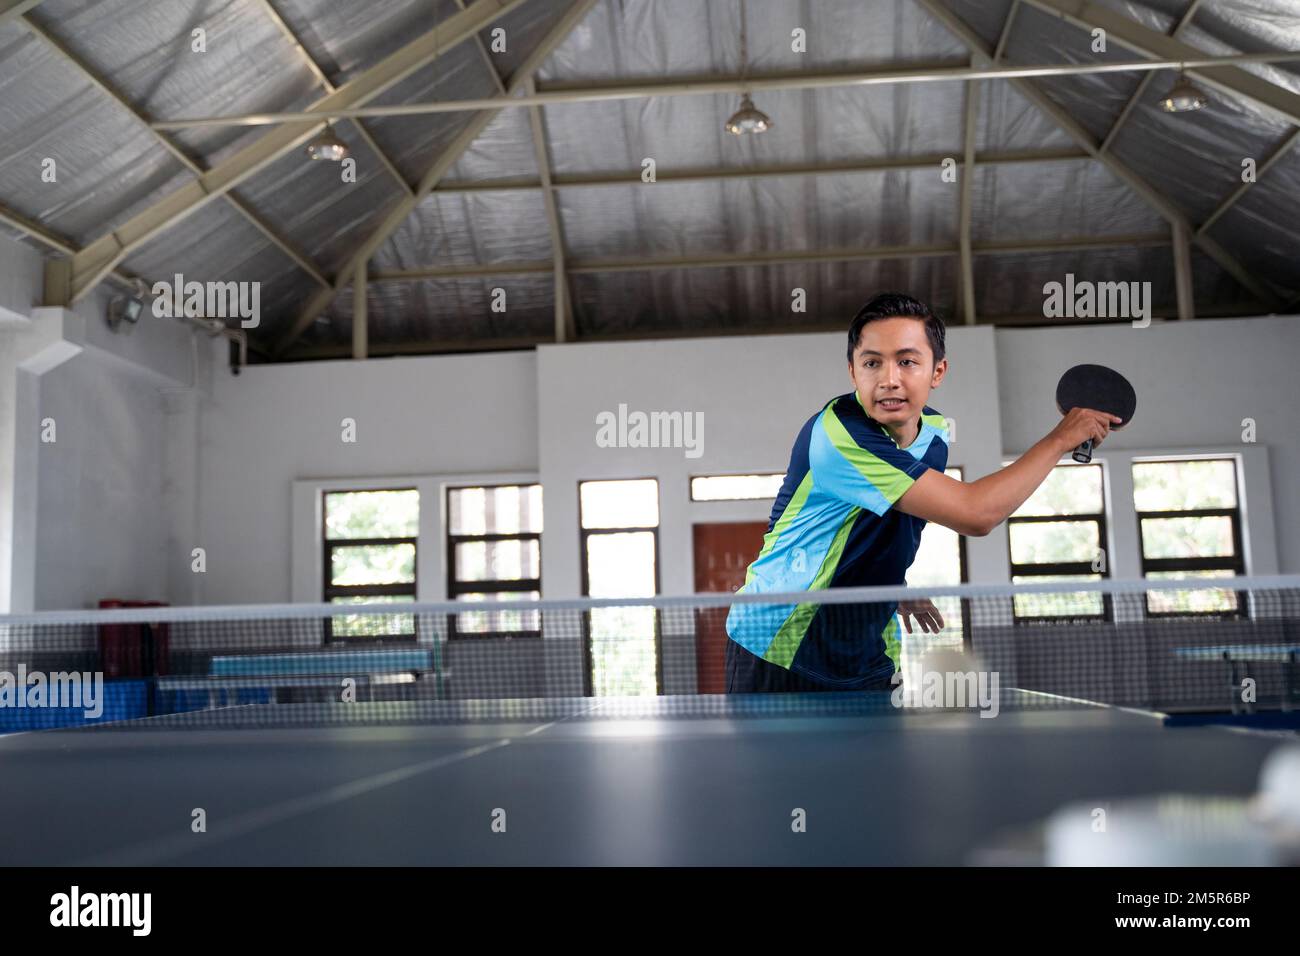 Asian male athlete hitting in a ping pong match Stock Photo